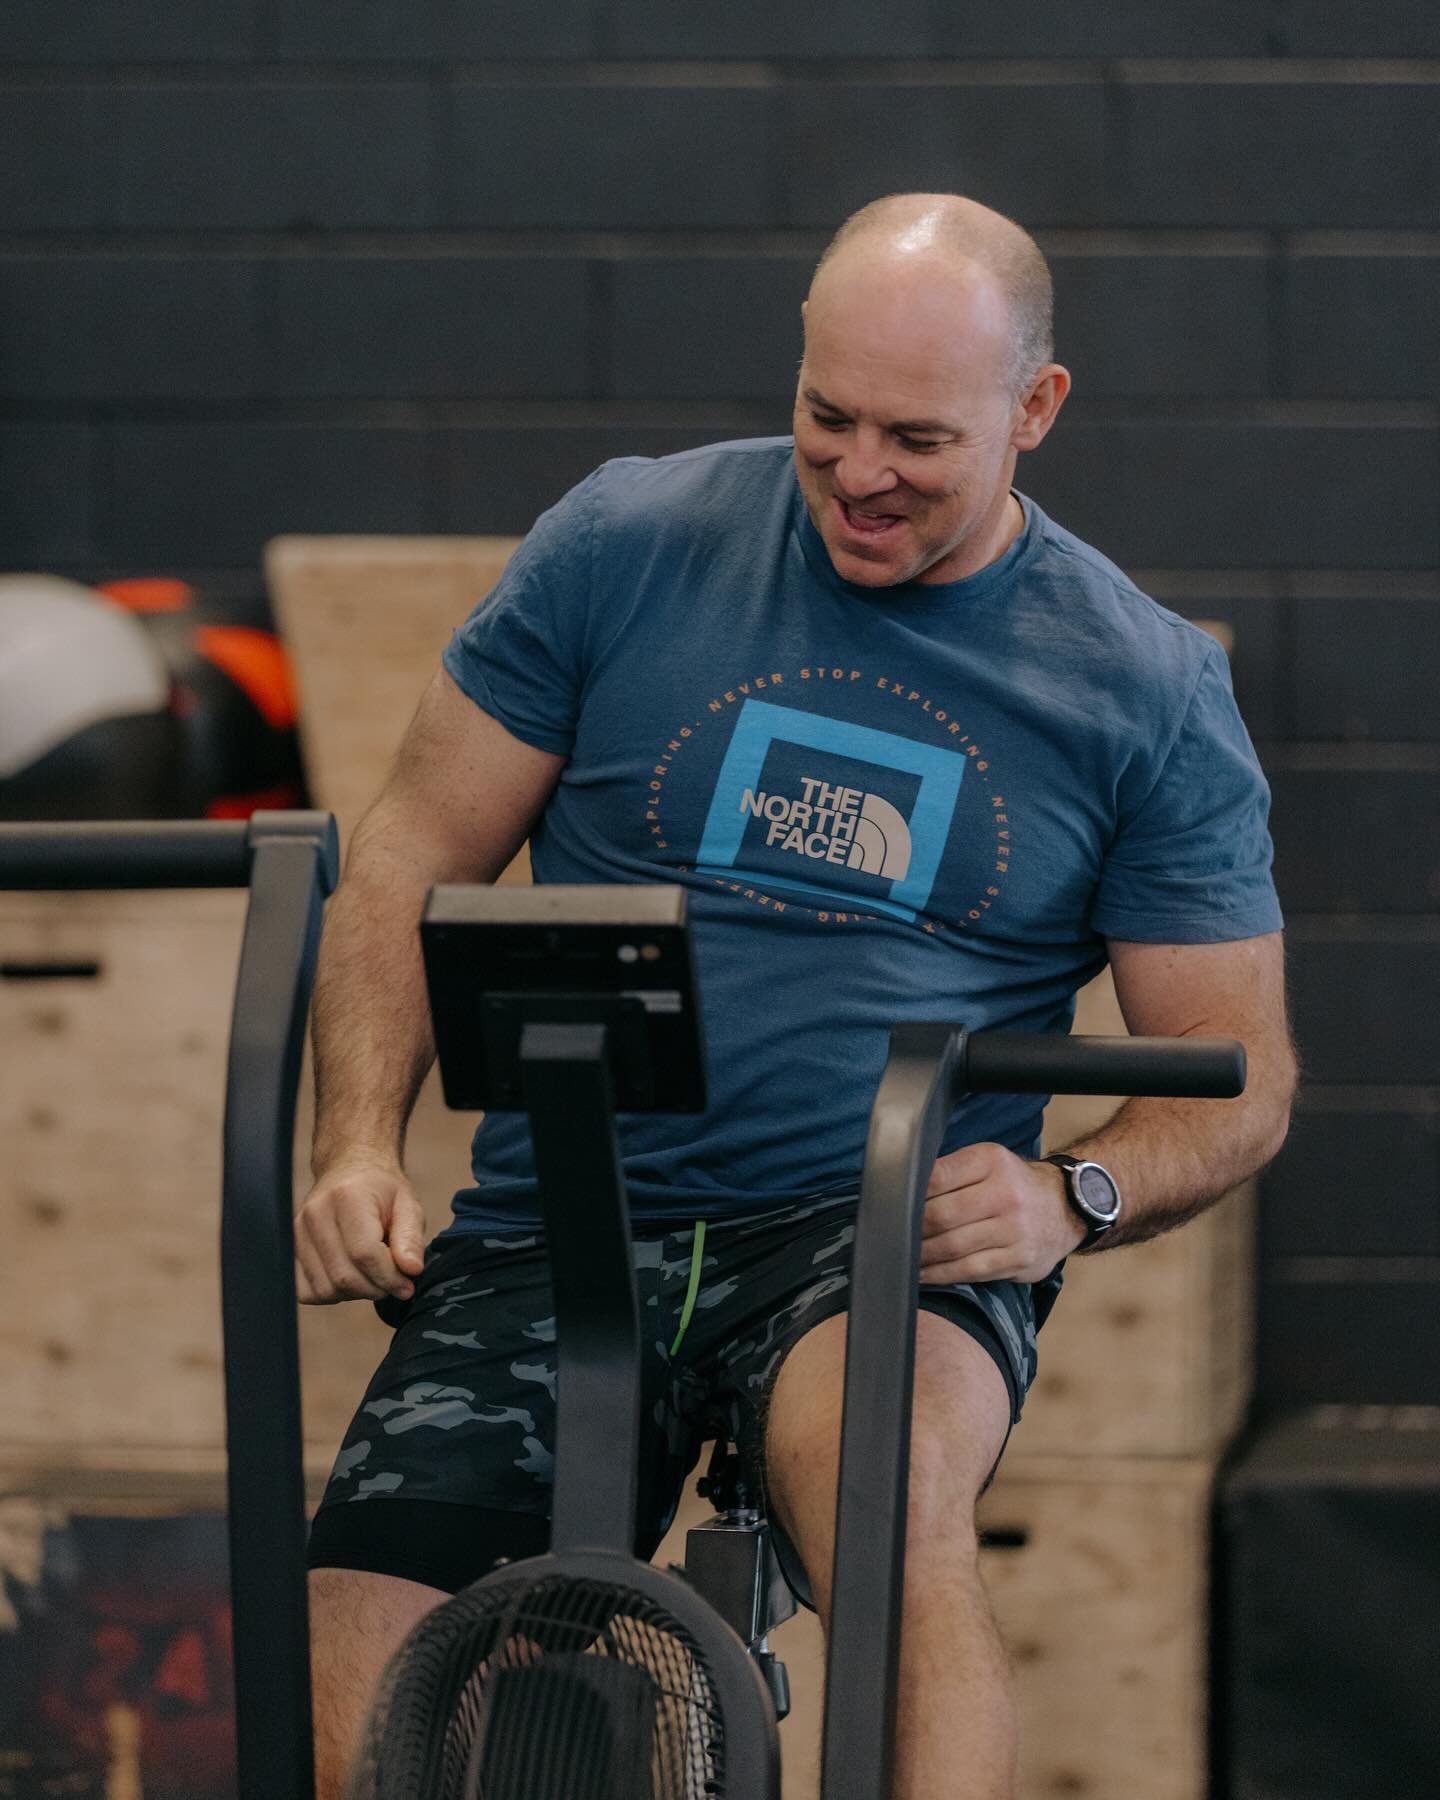 Making fitness fun since 2010.
Even on the dreaded Echo/Assault Bike. 

#CrossFitIndestri
#indestriSTRONG
#weINDESTRUCTIBLE
#CrossFit
#BuildingaSTRONGERCollingwood
#OURCommunity
#ThisisYear14
#CrossFitCanada 
#Collingwood
#weCrossFit

Photo: @emmanic